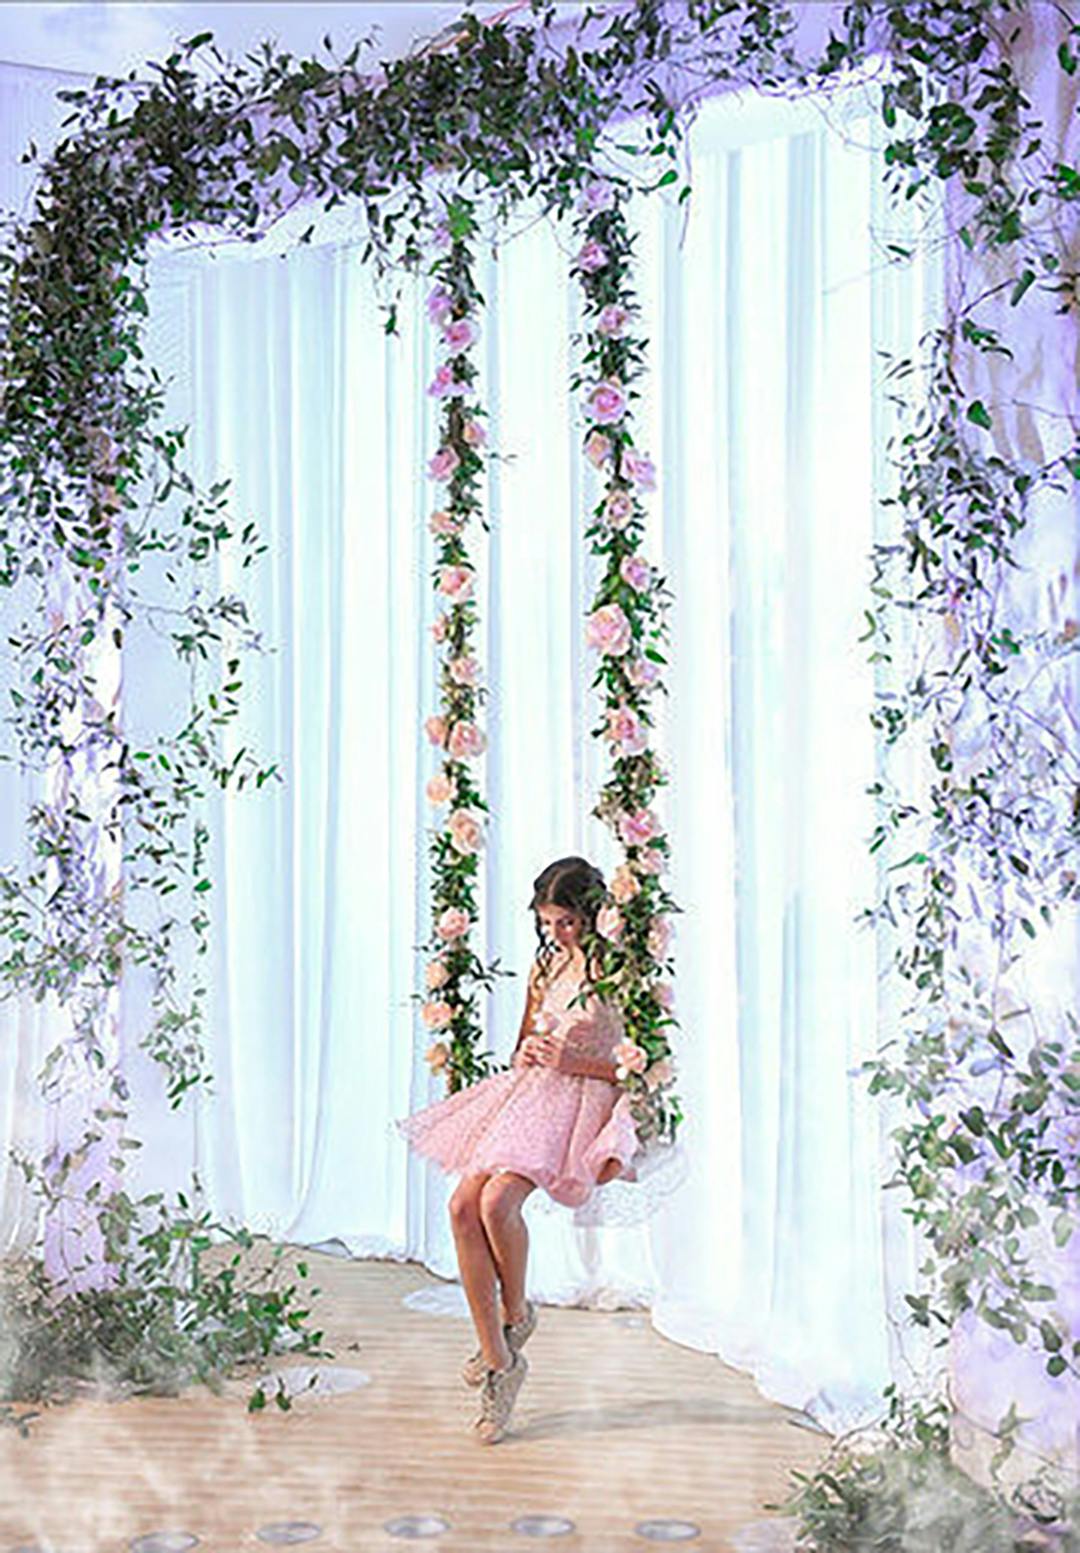 Pink floral swing at chic Bat Mitzvah party | PartySlate